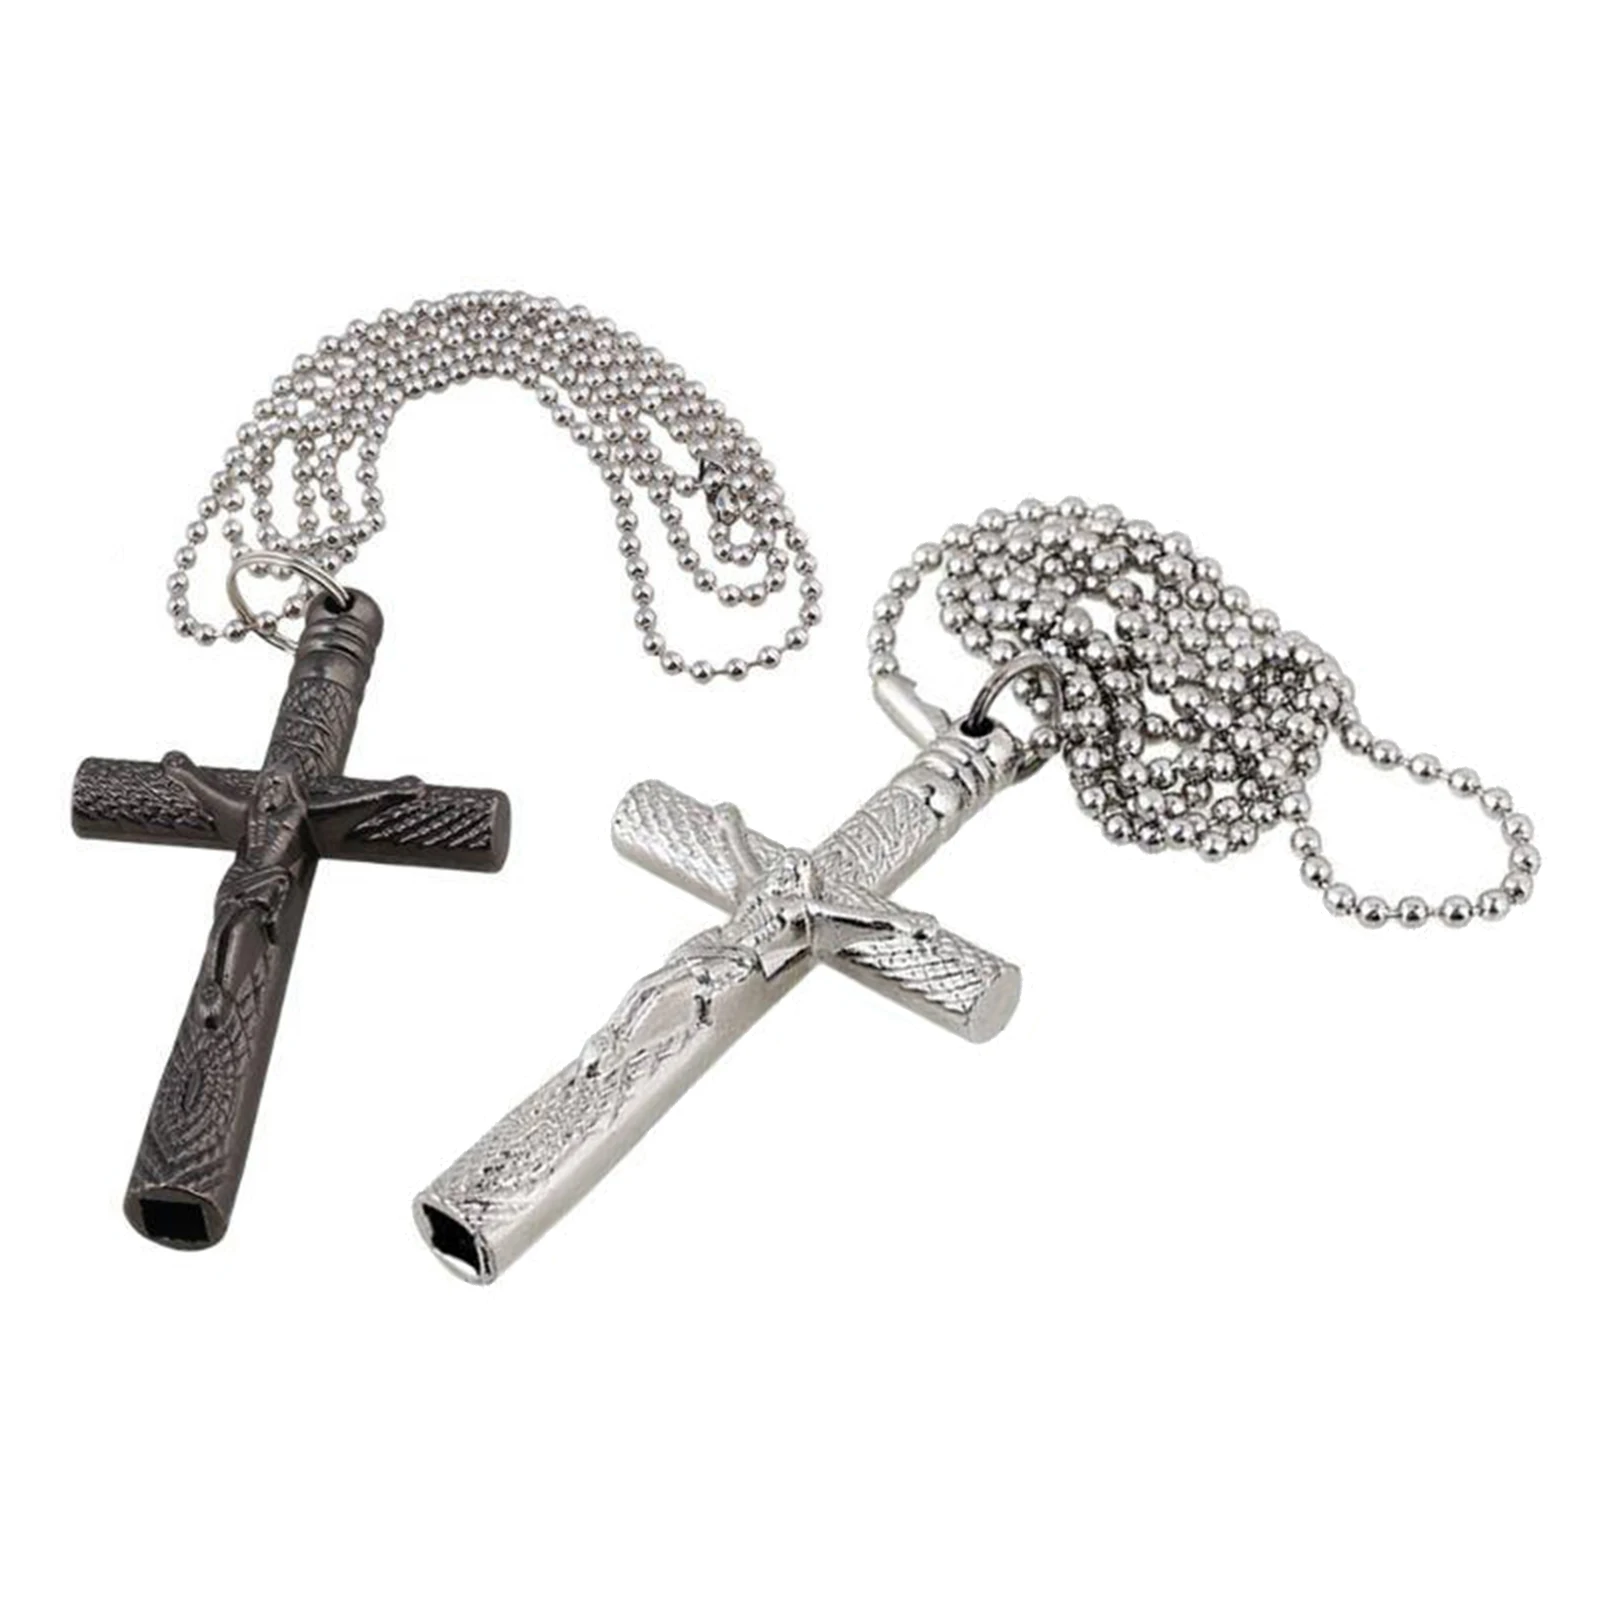 Drum Tuning Key Necklace Drum Tuning Wrench Cross Drum Key w/ Chain Necklace